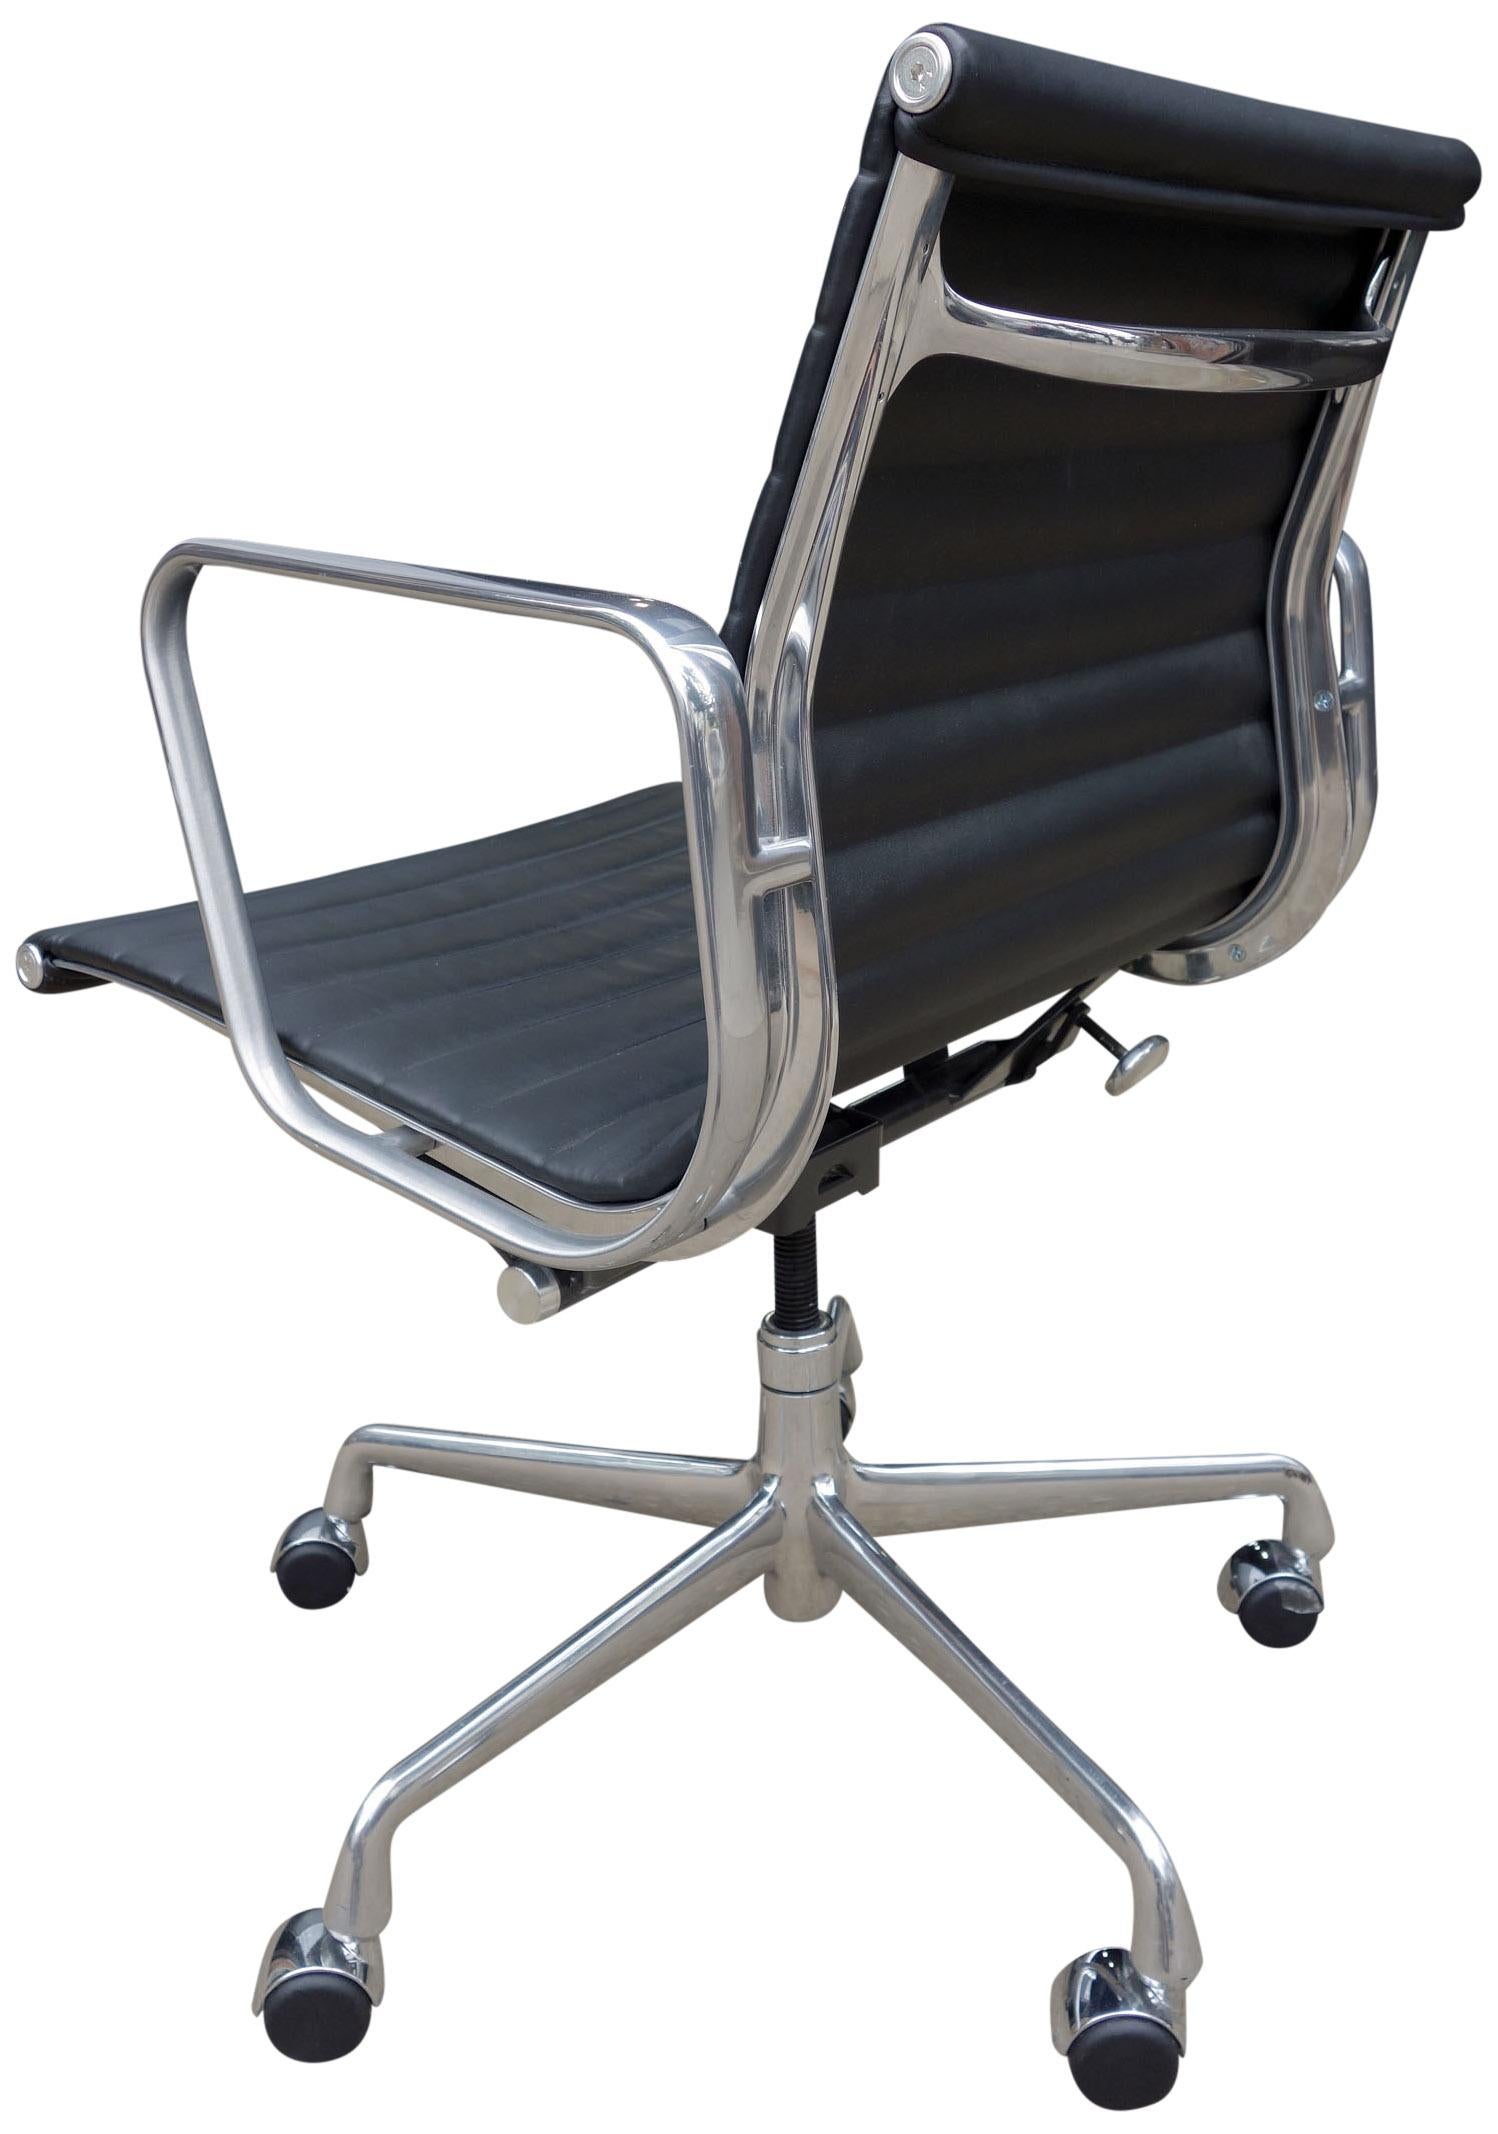 For your consideration are Eames Aluminum Group chairs in black vegan leather for Herman Miller. All in very good original condition showing minimal wear. With tilt and height adjustment.